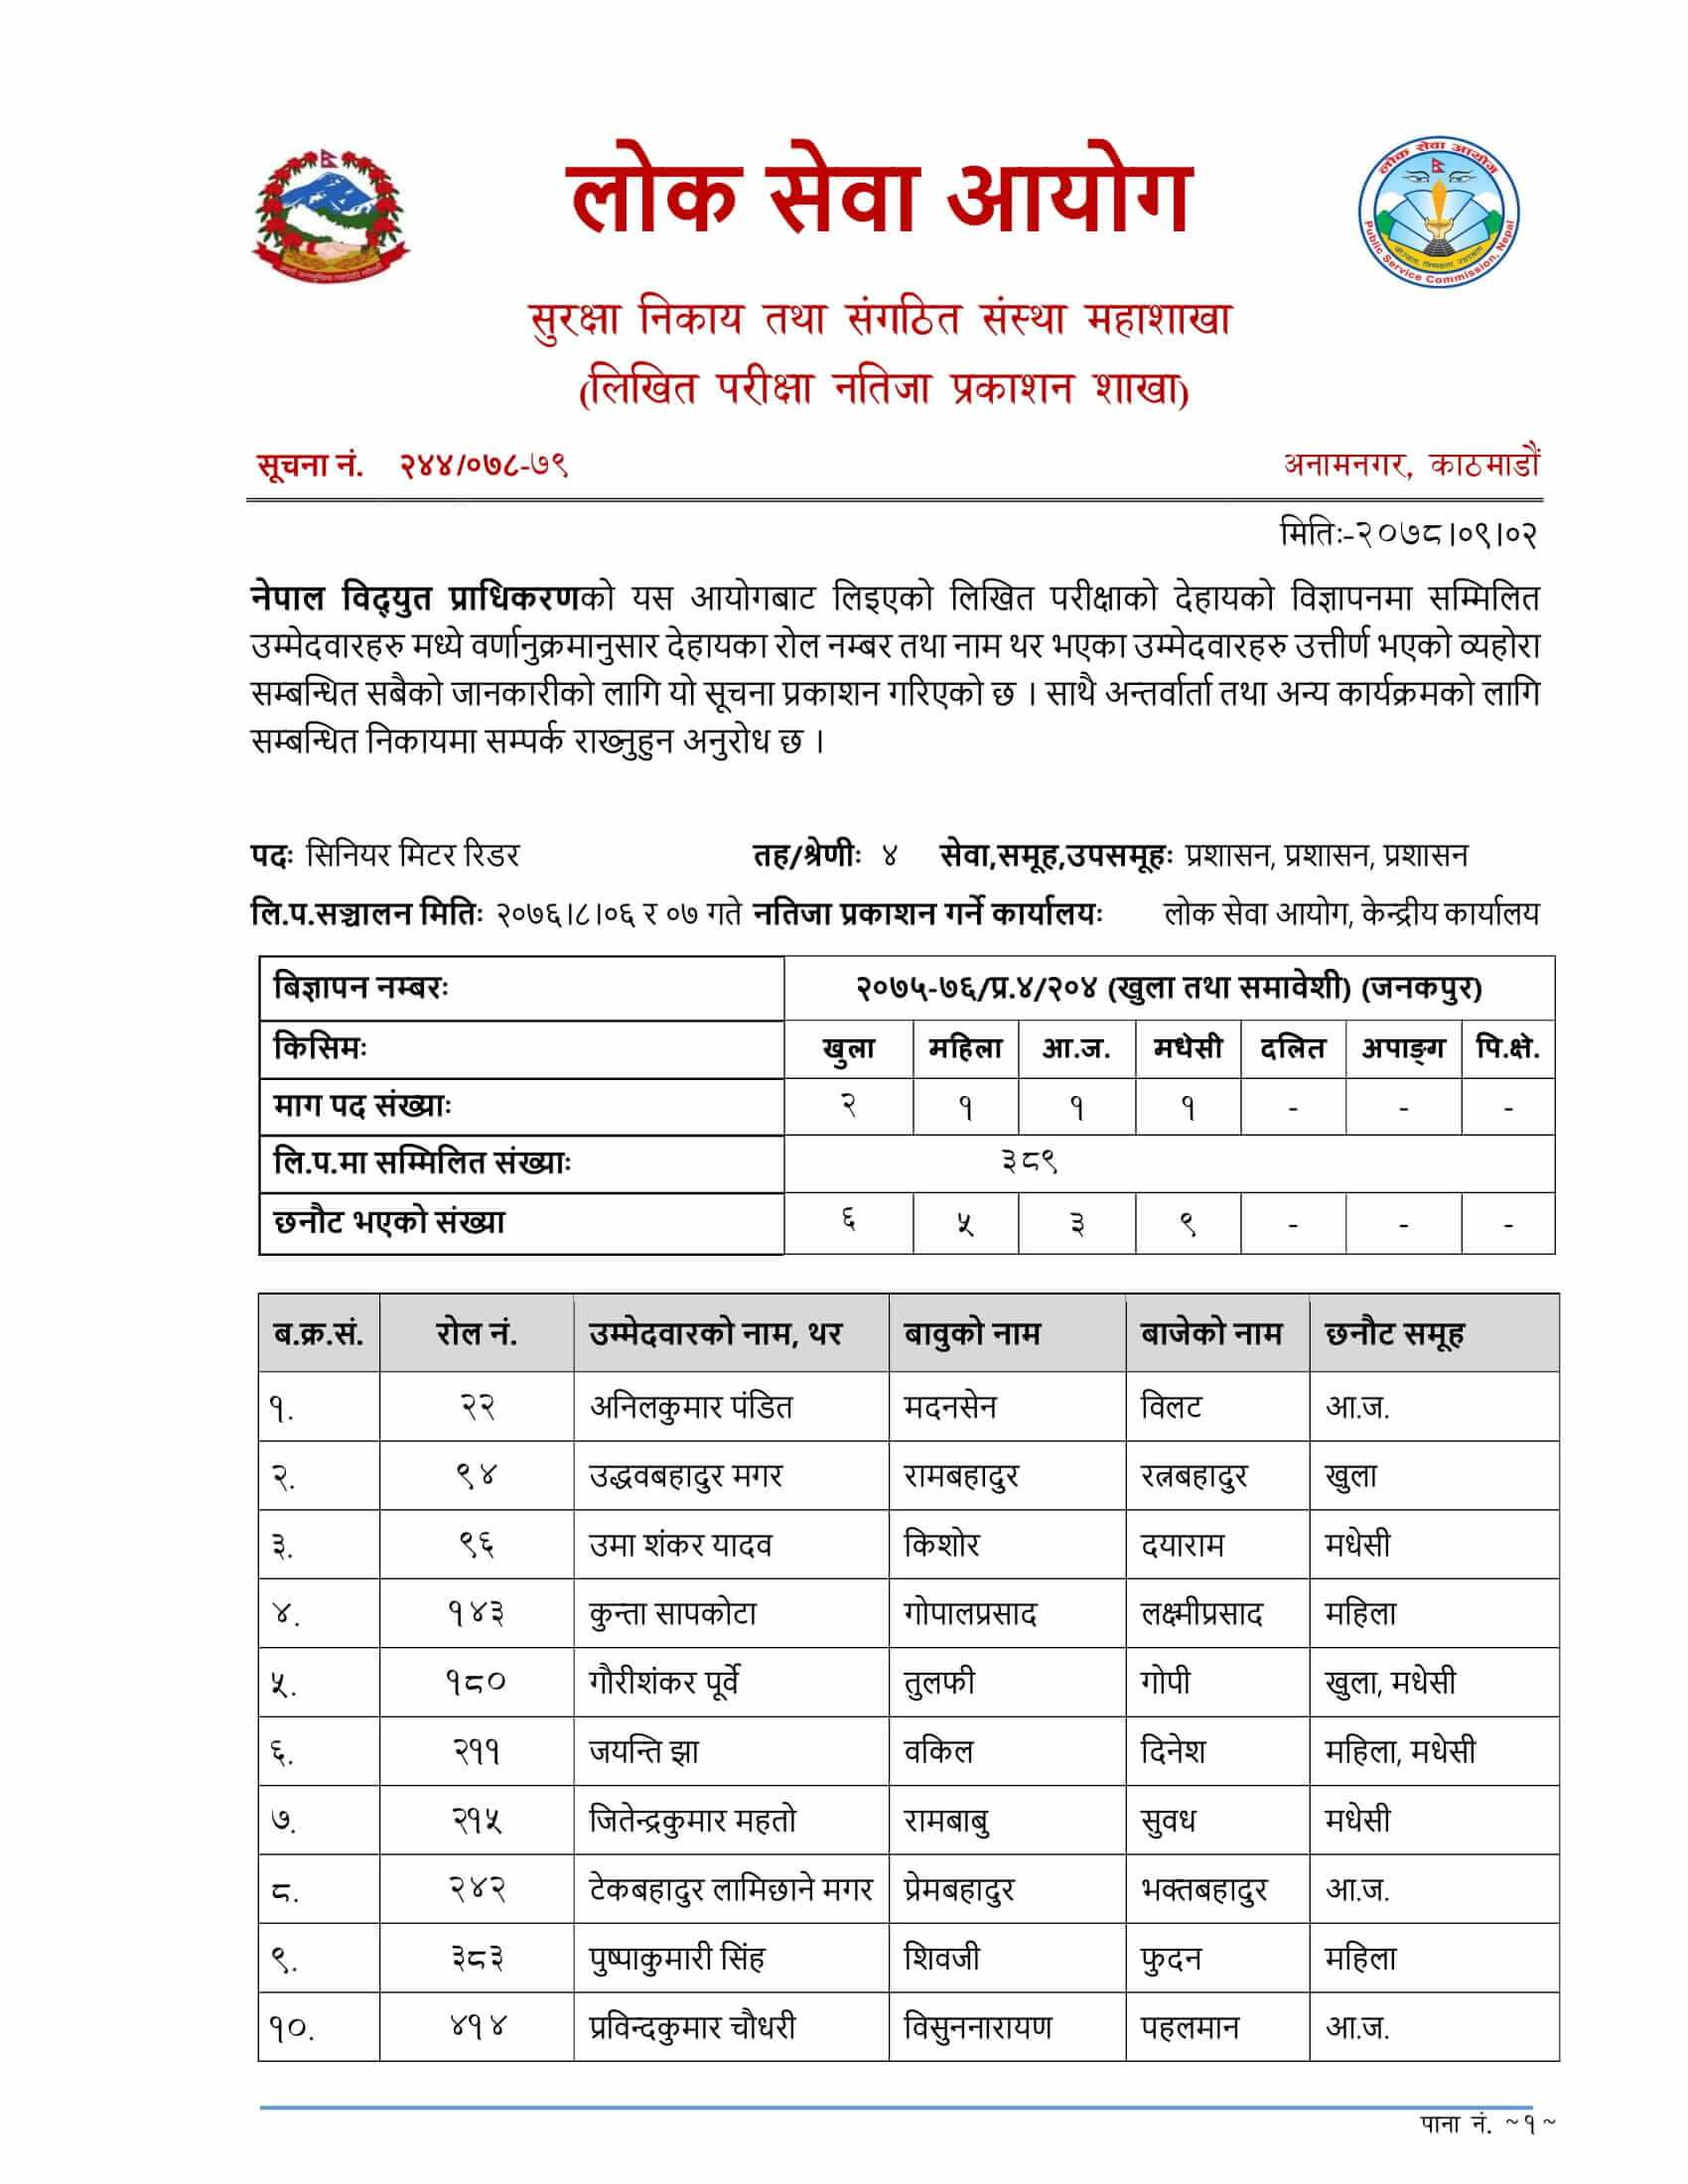 Nepal Electricity Authority Written Exam Result